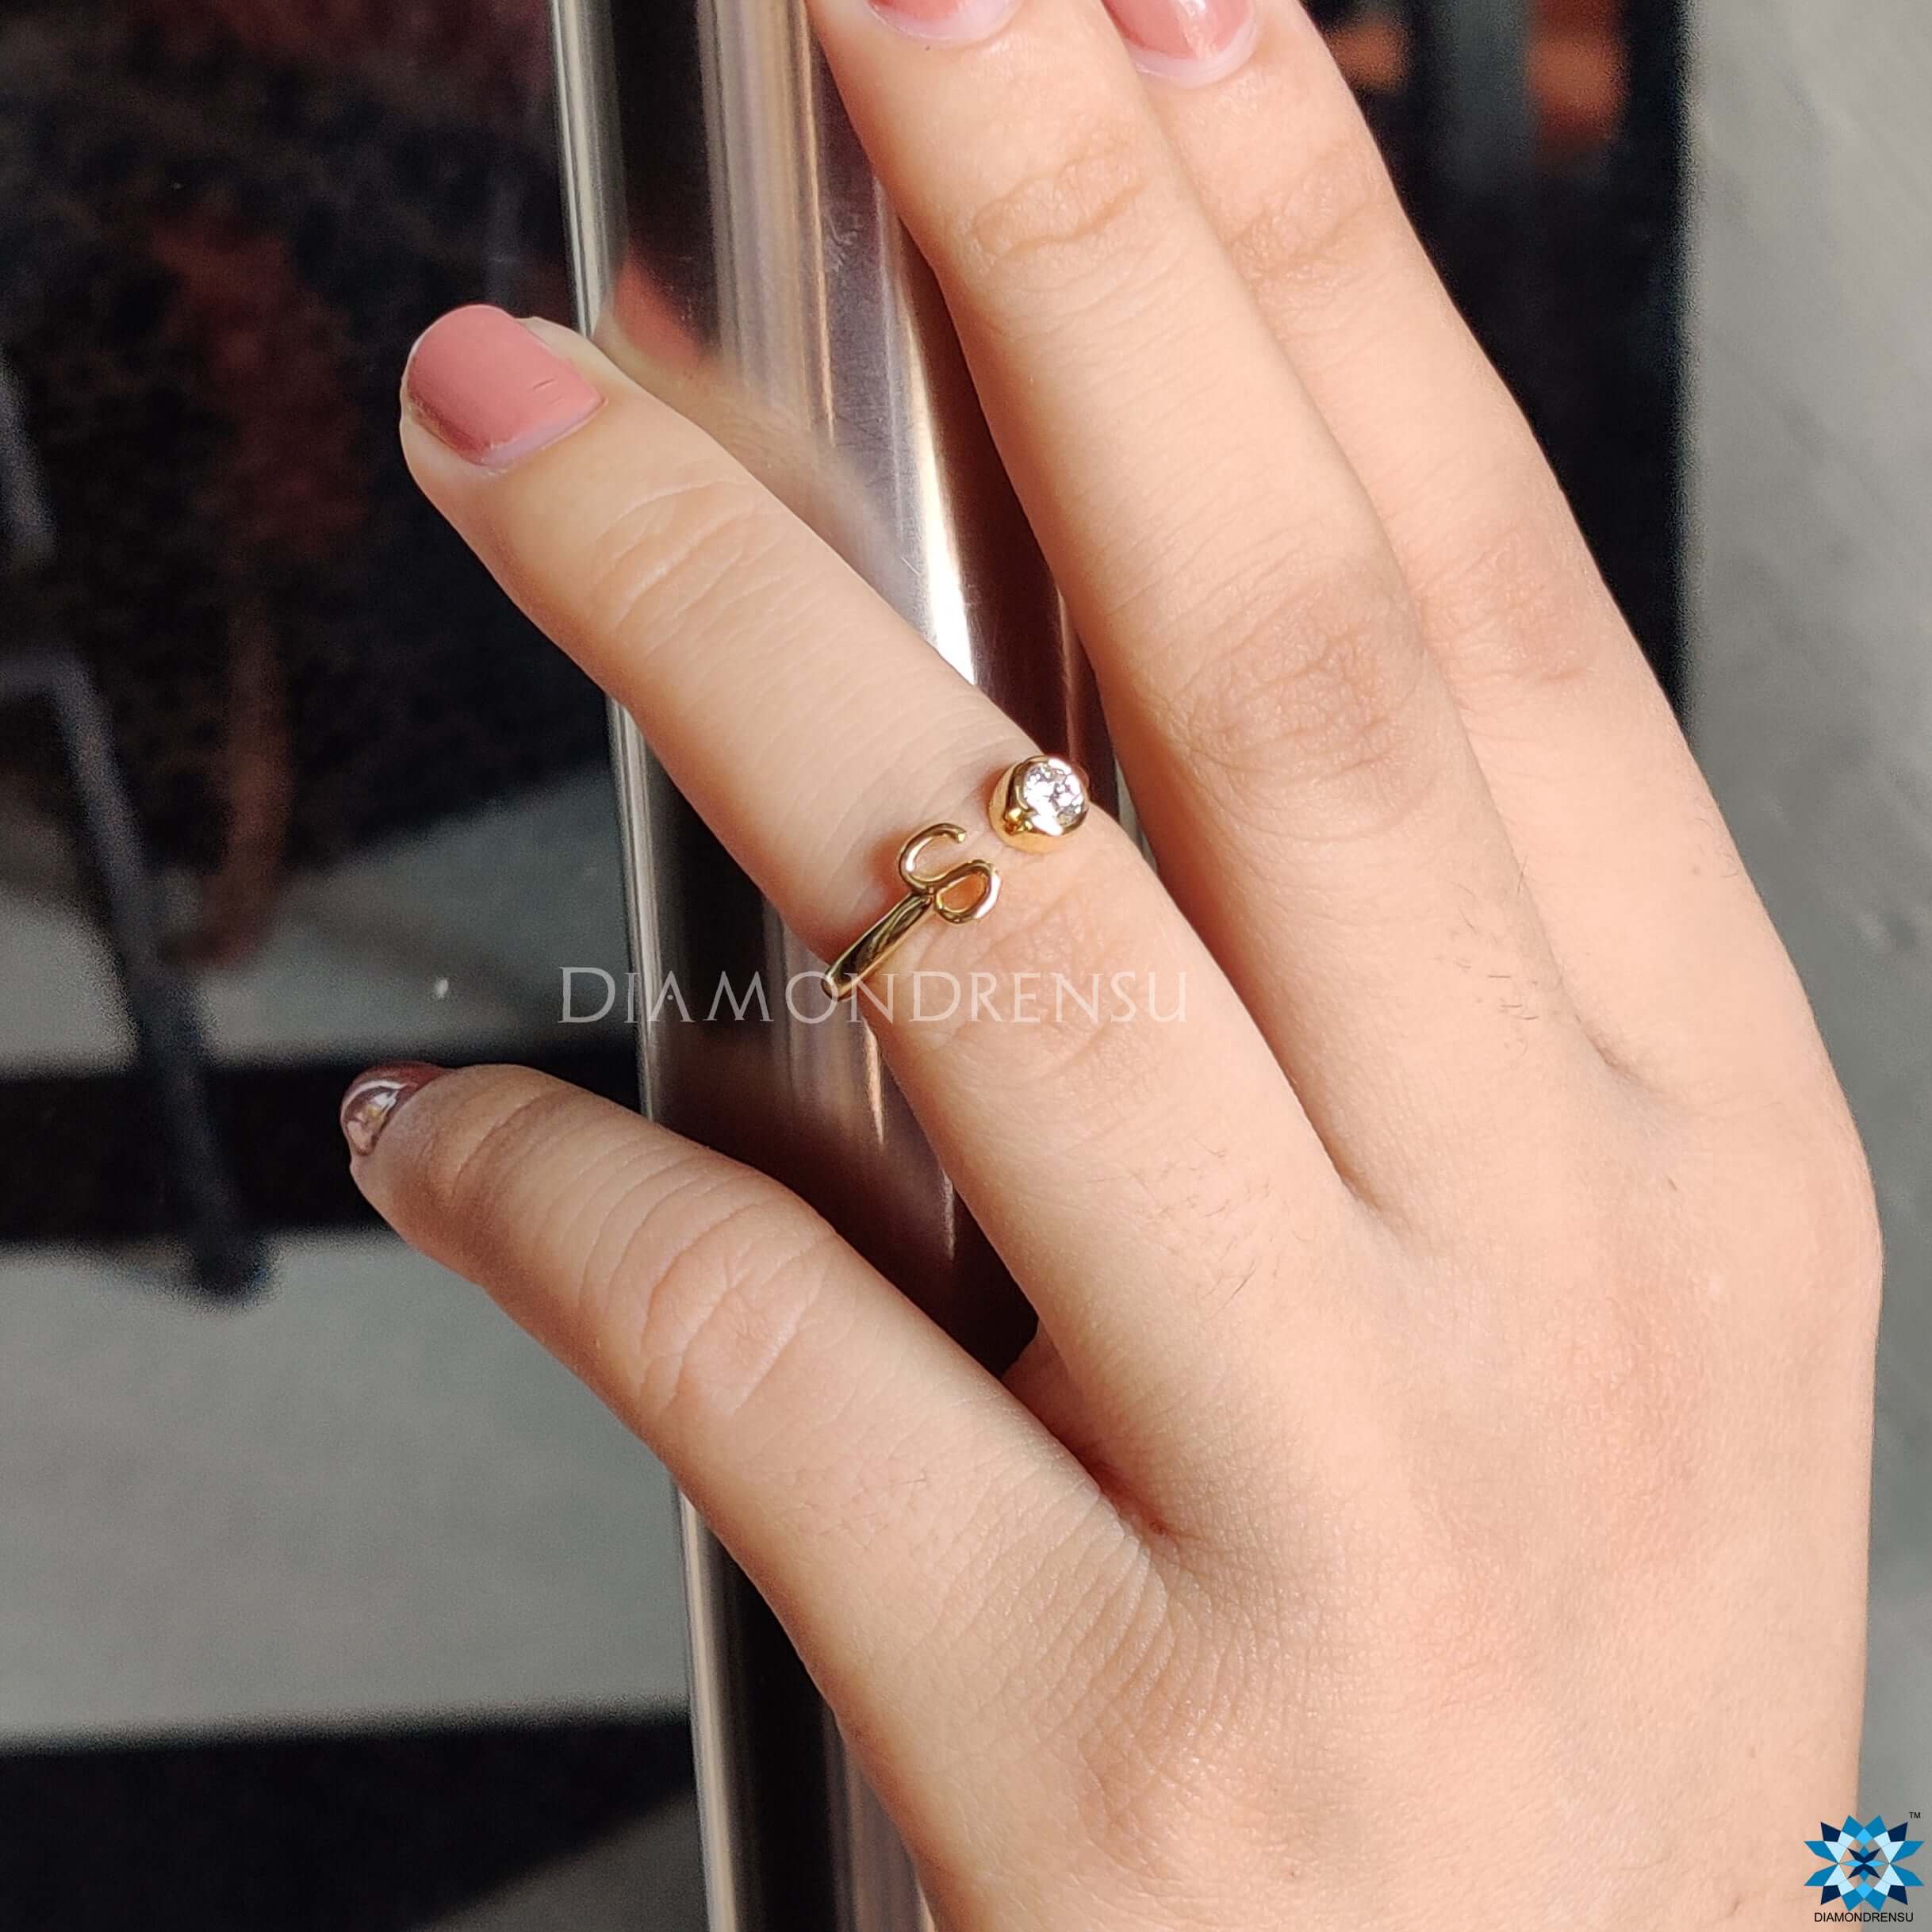 Latest gold ring designs for women with price and weight| Gold Engagement  Ring designs … | Gold engagement ring designs, Latest gold ring designs, Gold  ring designs